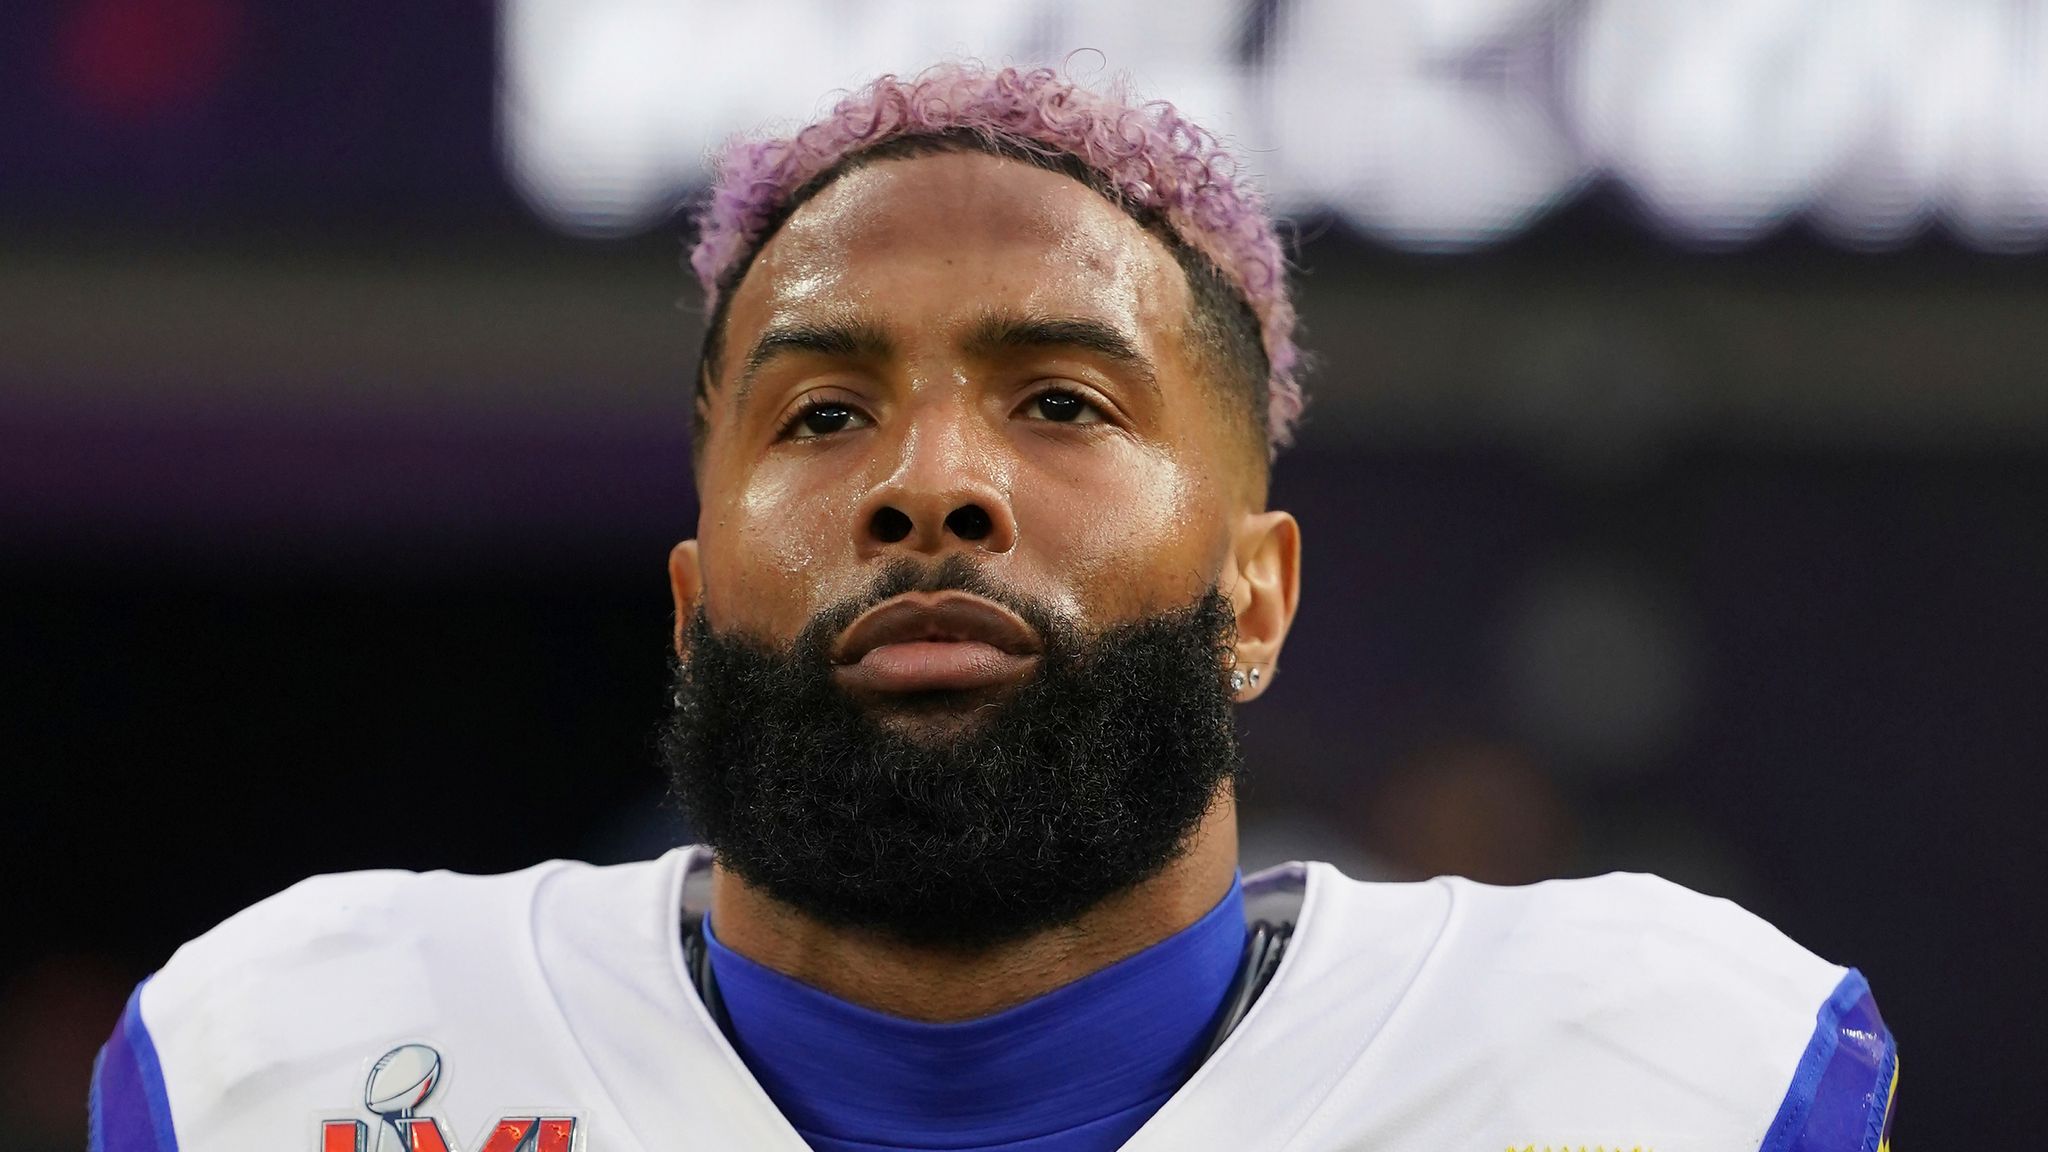  Odell Beckham Jr. Joins Miami Dolphins Excitement Builds as Former Teammates Set High Hopes---